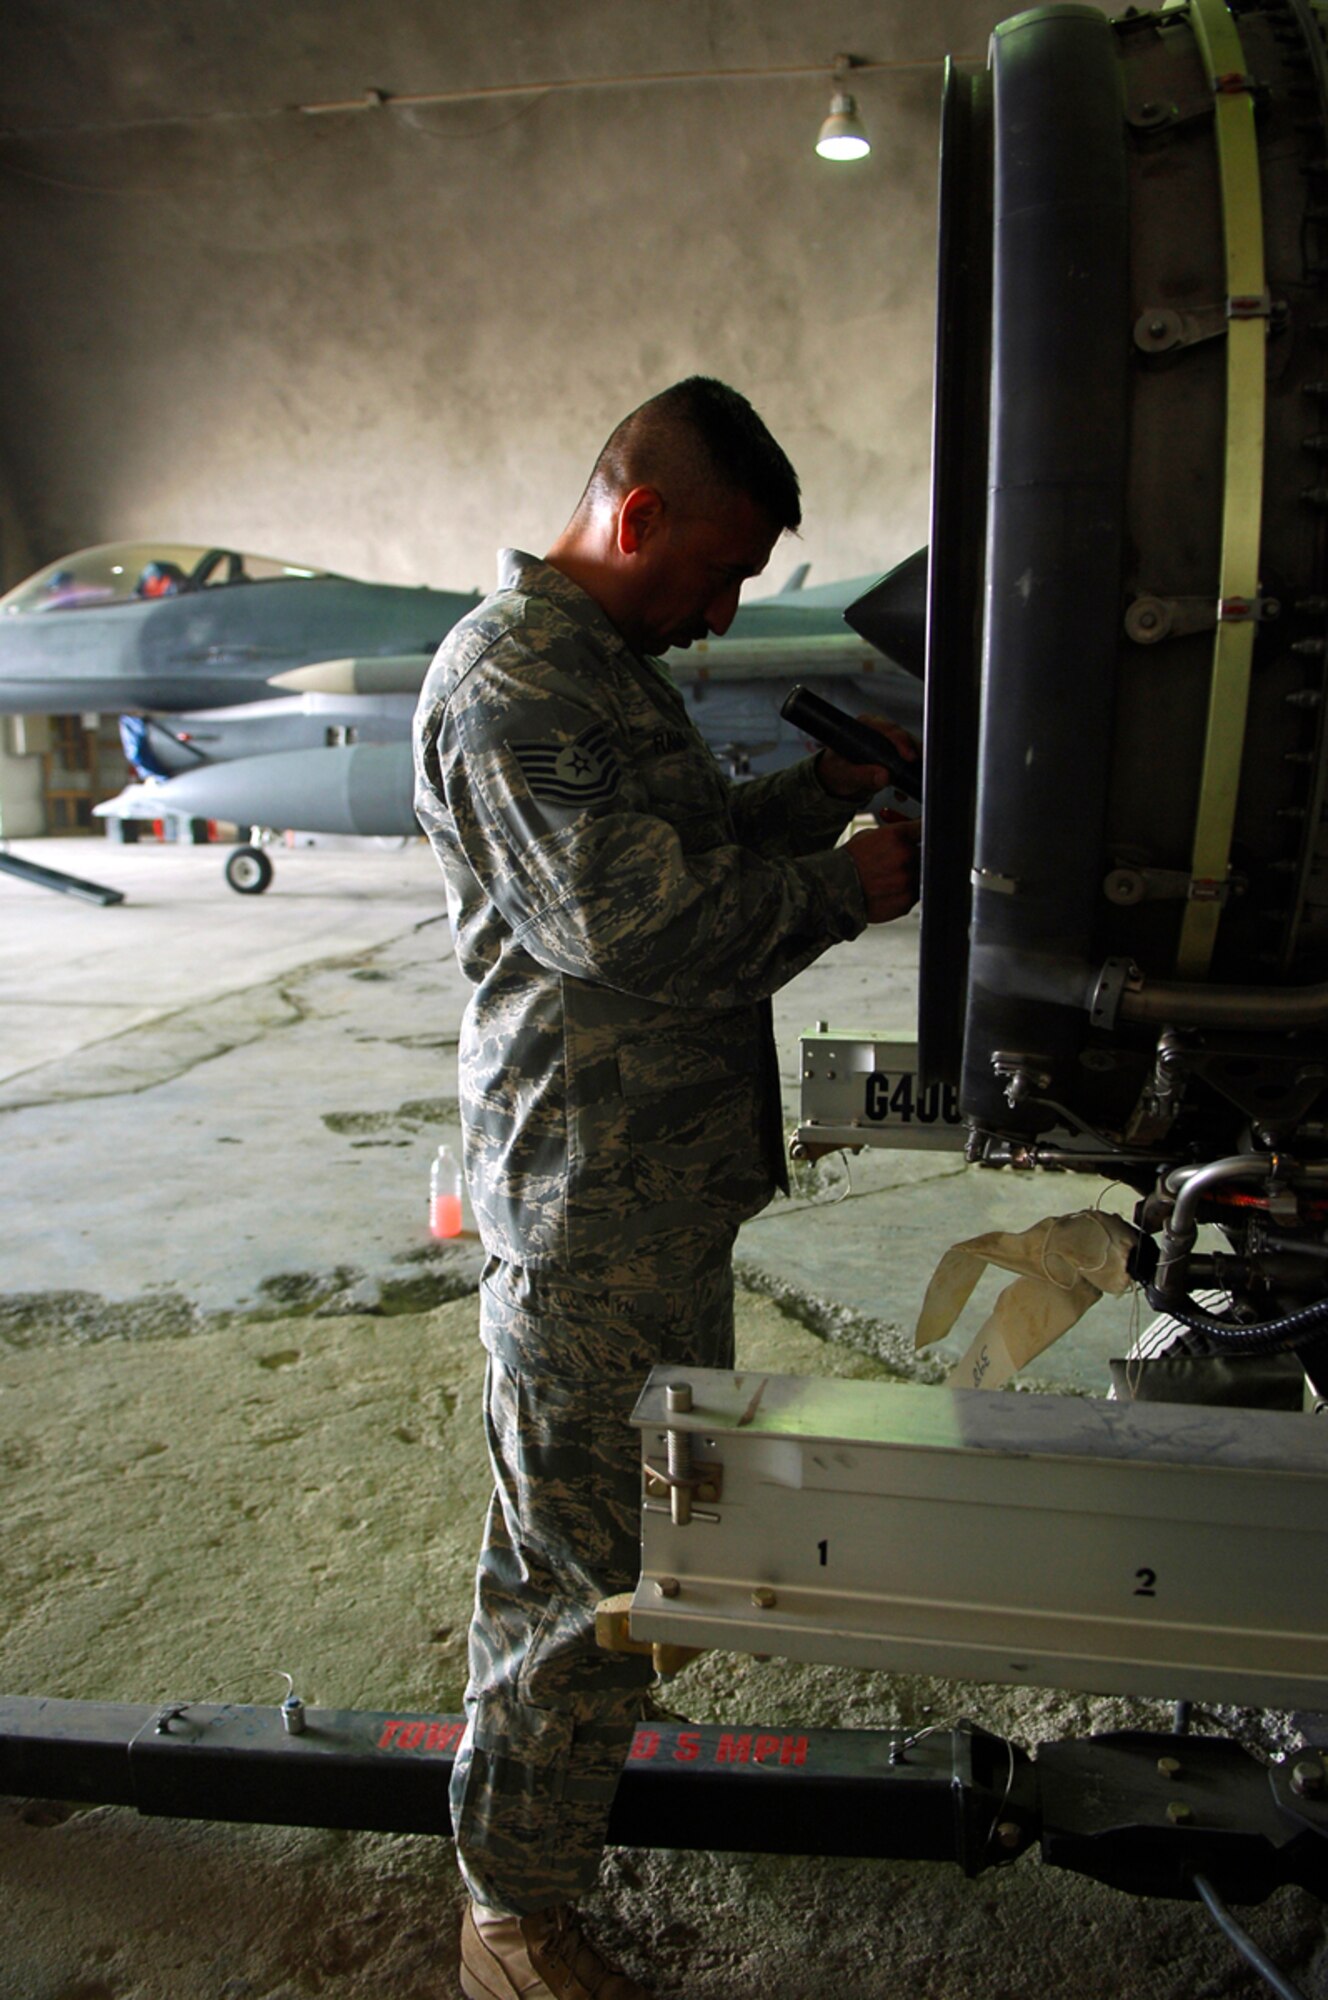 JOINT BASE BALAD, Iraq -- Tech. Sgt. Juan Ramon, a 332nd Expeditionary Maintenance Squadron jet engine mechanic assigned to the Tiger Aircraft Maintenance Unit, inspects the inlet fan blades of an F-16 Fighting Falcon engine for nicks and scratches here July 7. Foreign object debris damage prevention is critical to maintaining the jets' engines. One small rock a piece of trash could cause thousands of dollars in damage to an engine. (U.S. Air Force photo/Staff Sgt. Mareshah Haynes)